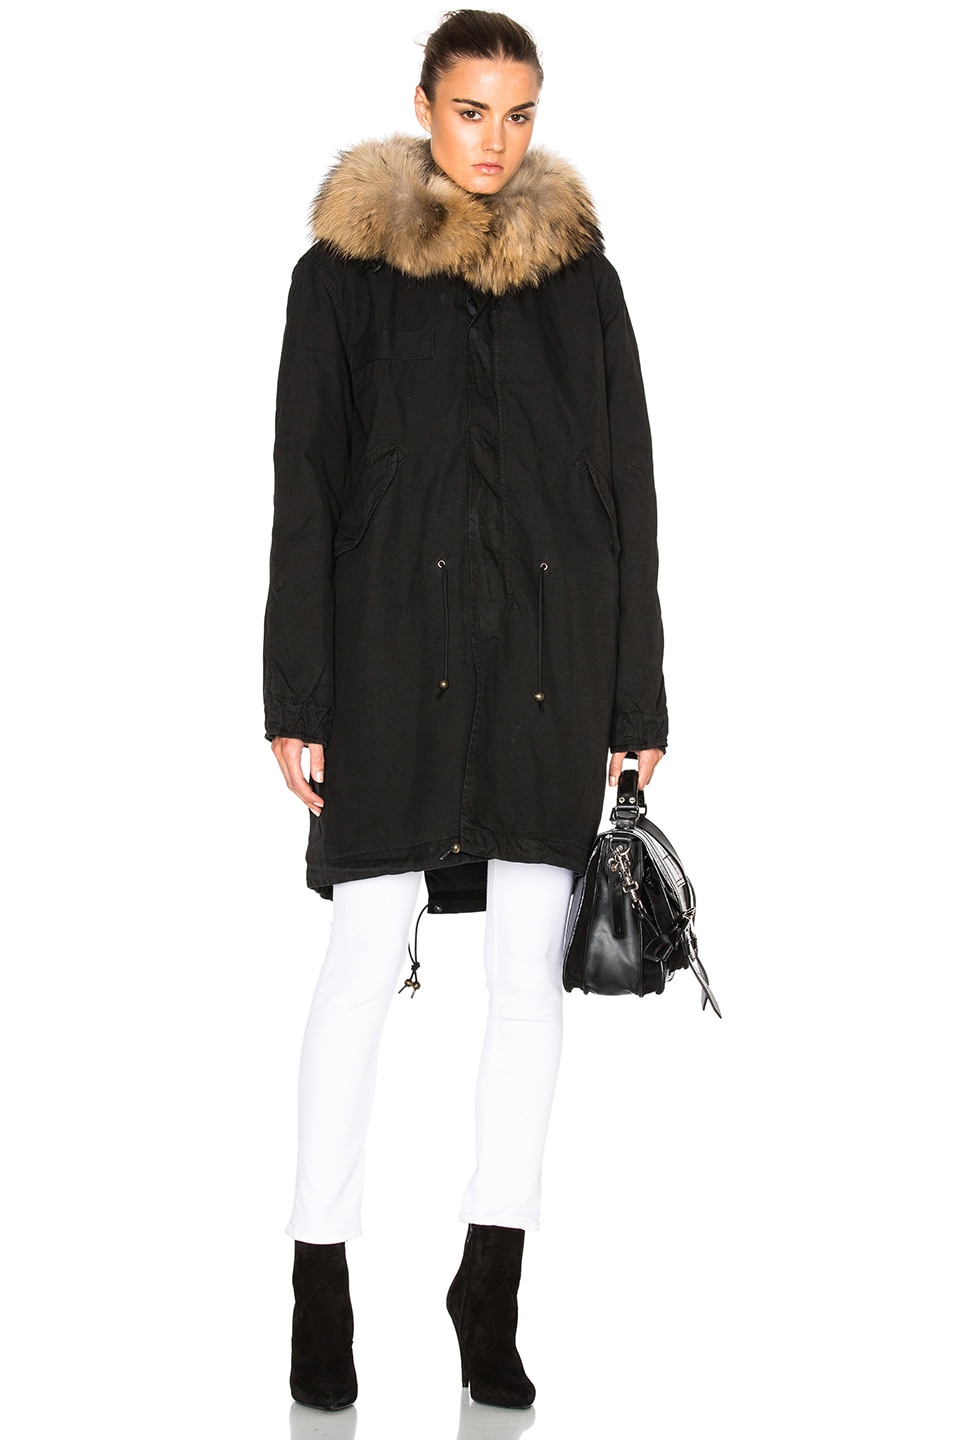 Image 1 of Mr & Mrs Italy Army Parka Jacket With Raccoon Fur in Black & Natural